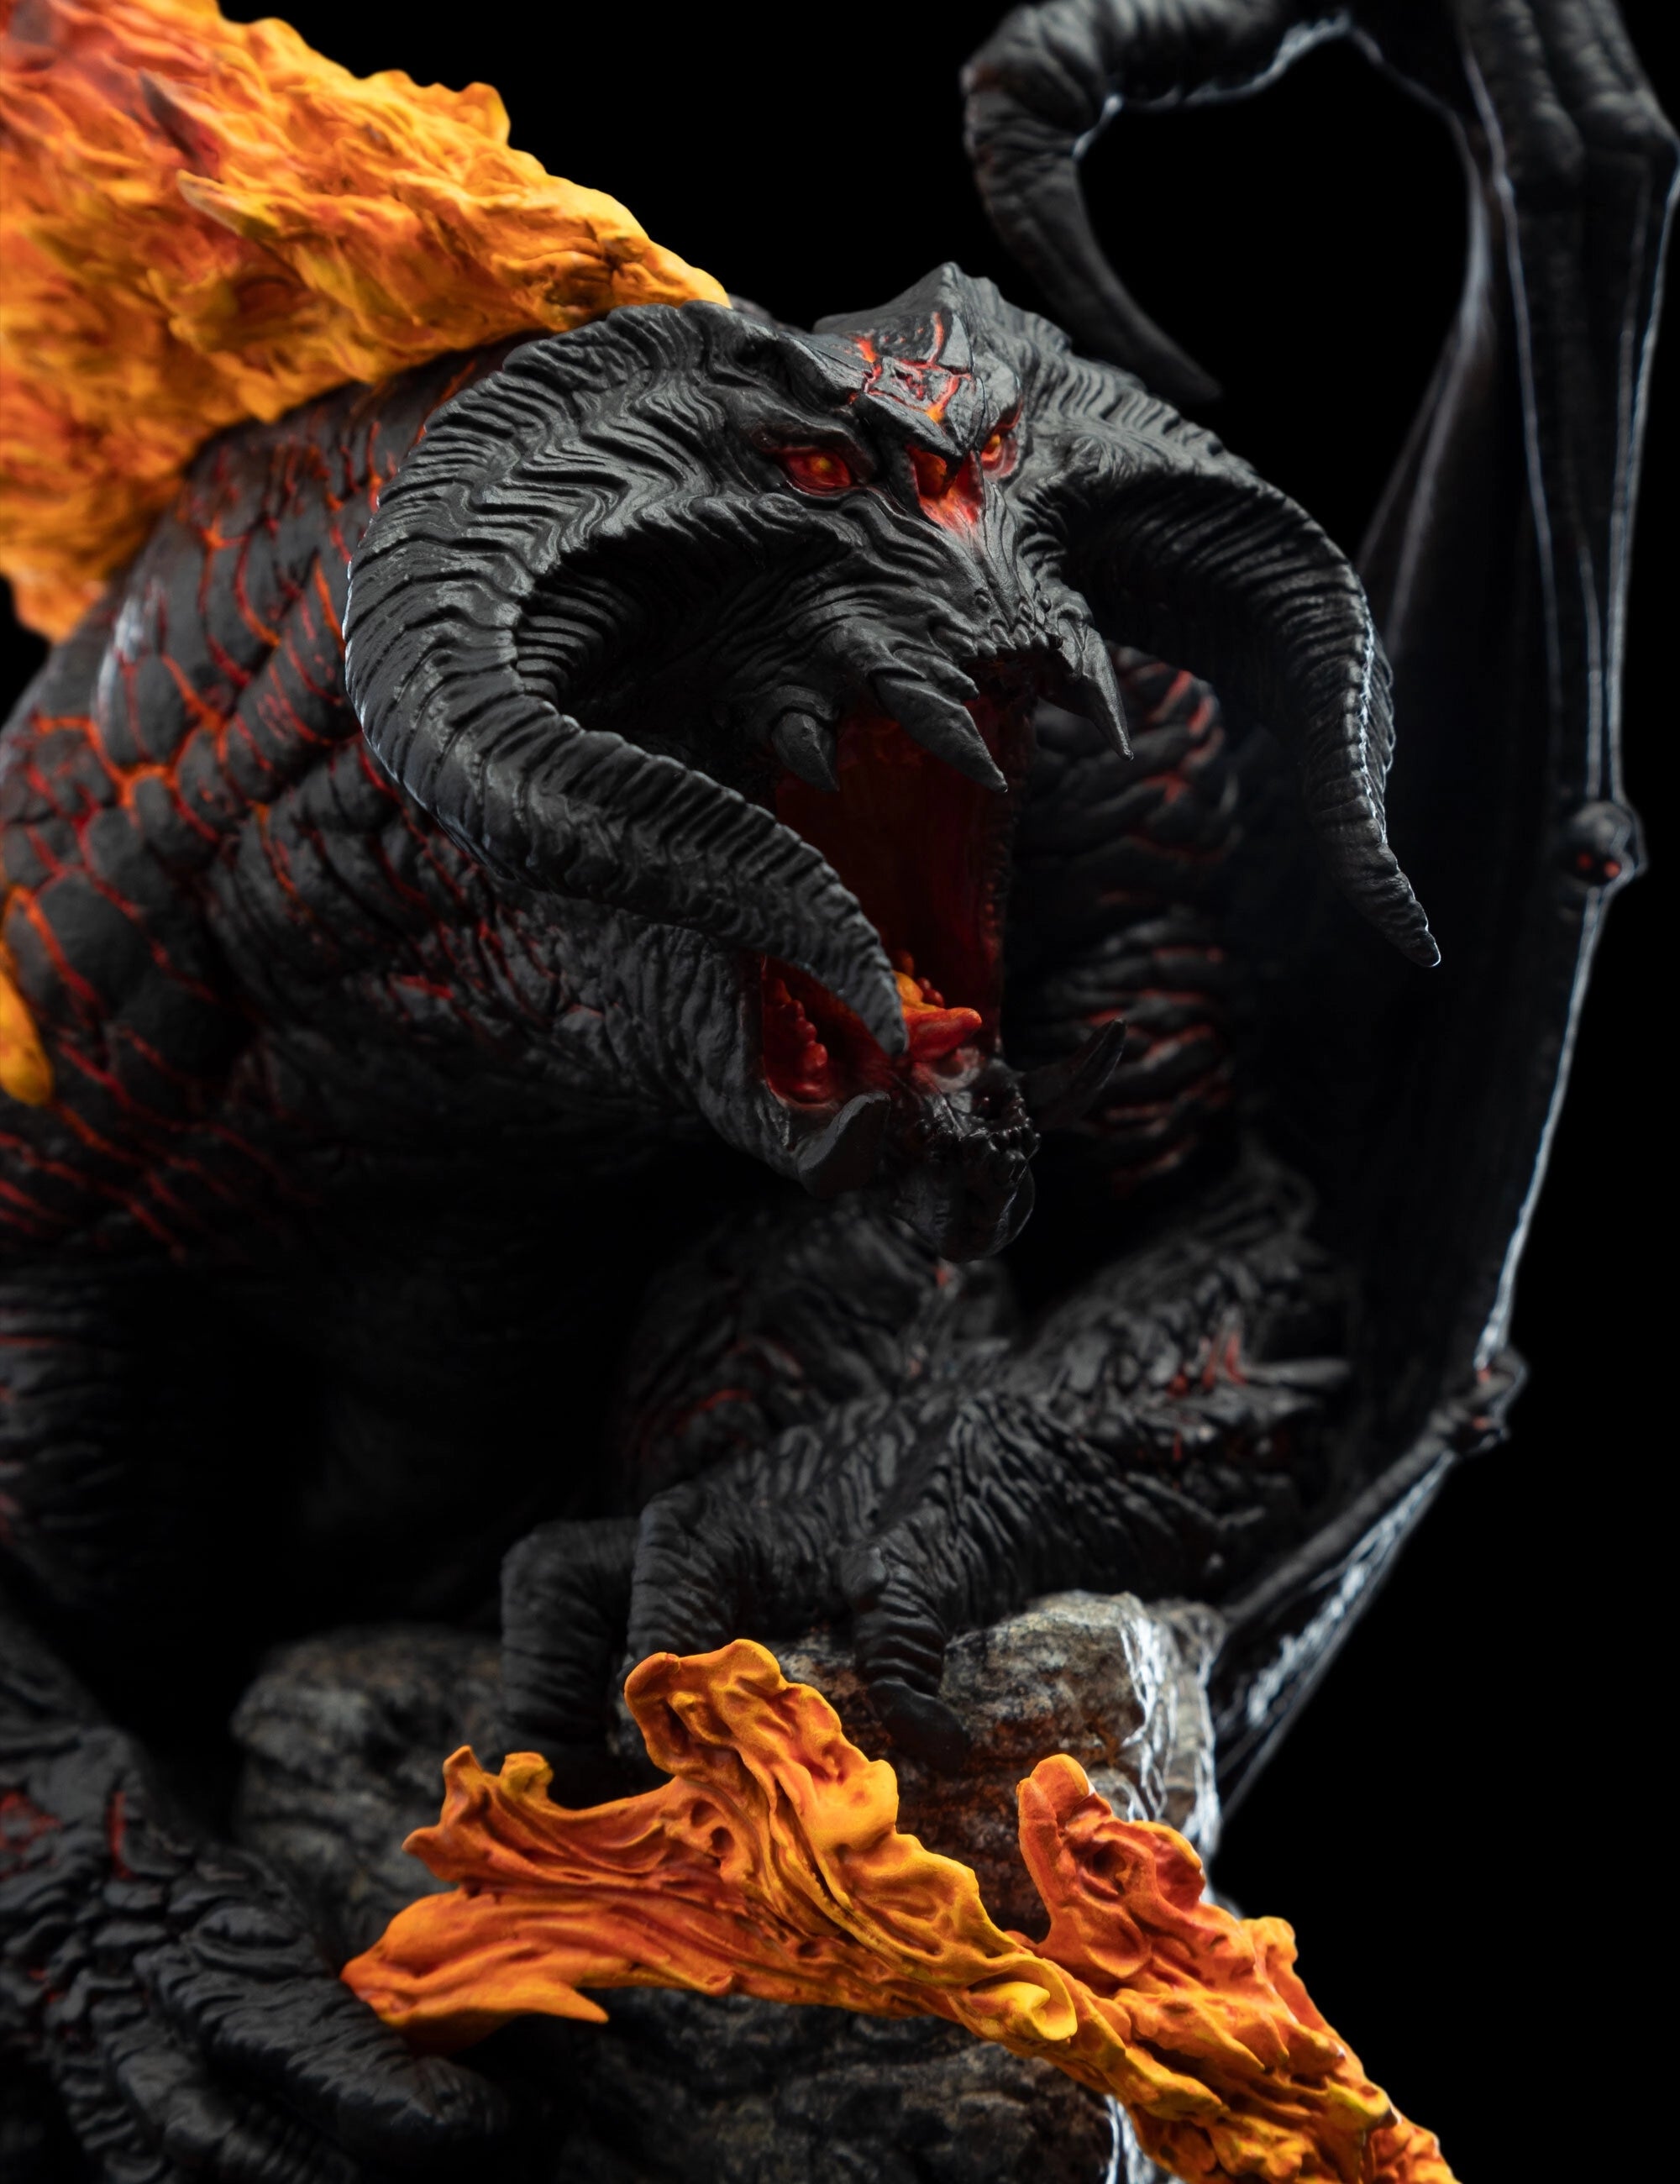 The Balrog (Classic Series) Lord of the Rings Polystone Statue